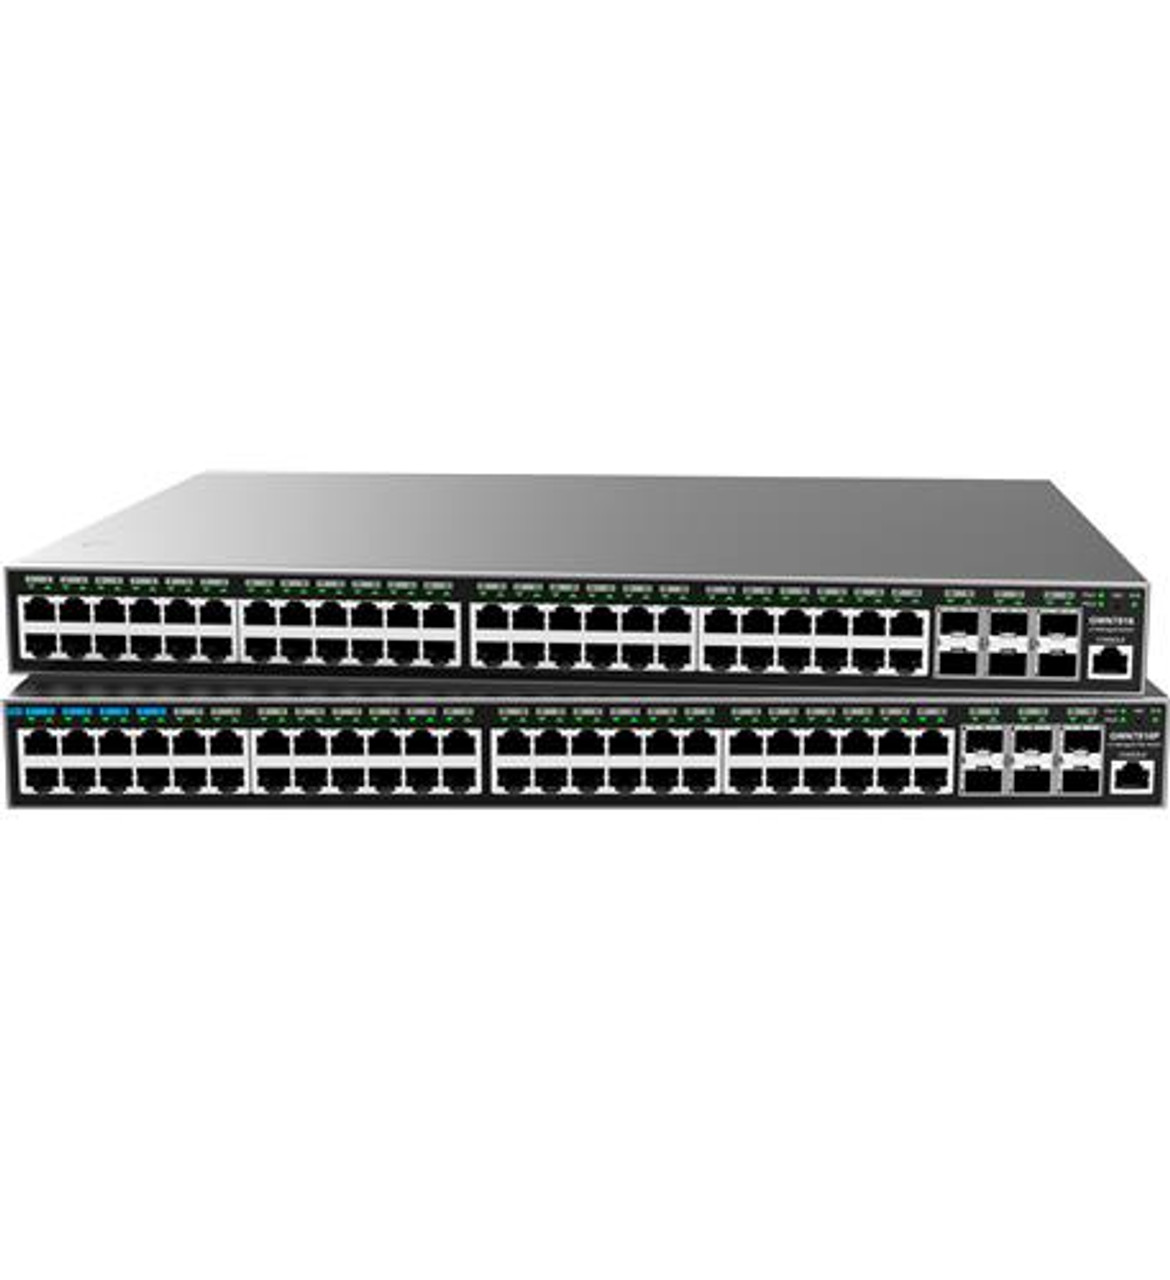 48 Gigabit Ethernet ports and 6 Gigabit SFP+ ports
Supports deployment in IPv6 and IPv4 networks
Smart power control to support dynamic PoE/PoE+, PoE++ (GWN7816P) power allocation per port for the PoE models
ARP Inspection, IP Source Guard, DoS protection, port security & DHCP snooping
Embedded controller to manage switch; GWN.Cloud and GWN Manager